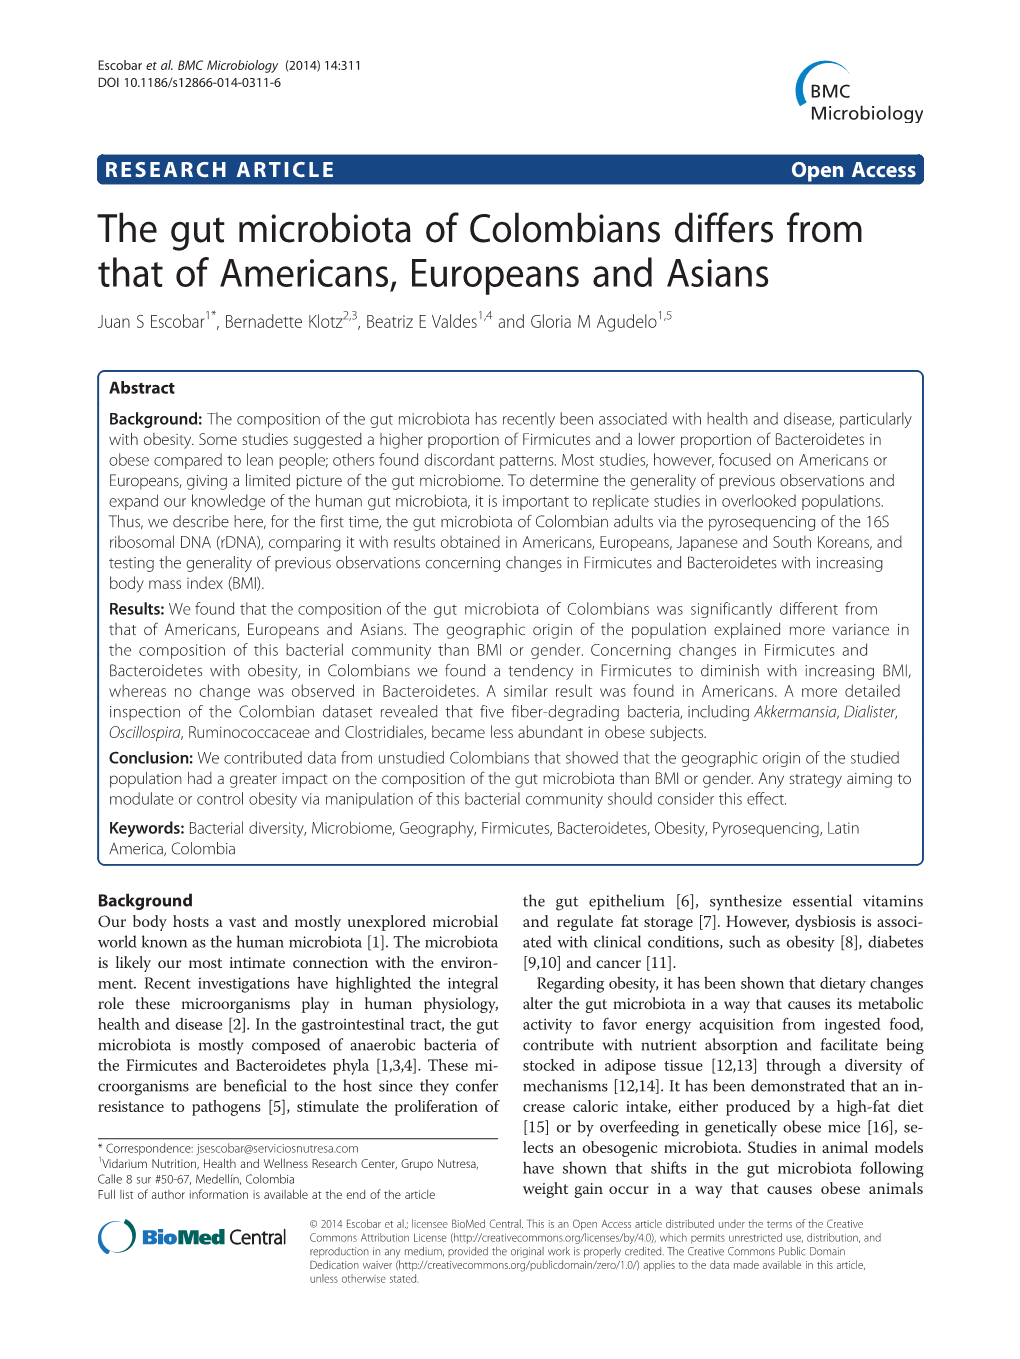 The Gut Microbiota of Colombians Differs from That of Americans